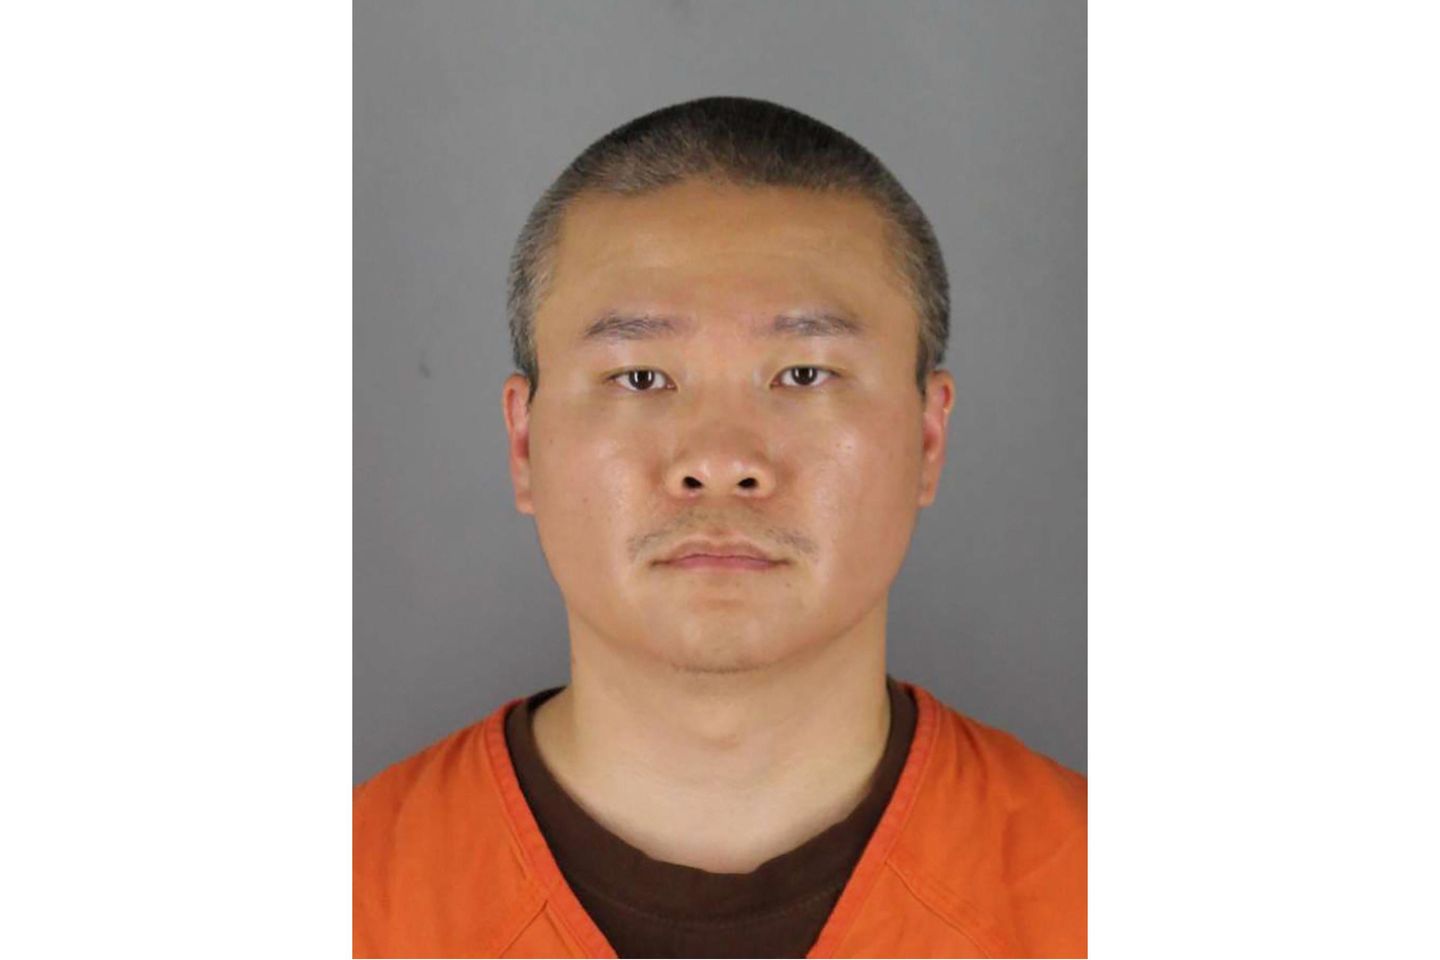 Tou Thao, ex-Minneapolis officer, faces sentencing on state charge for his role in Floyd's killing